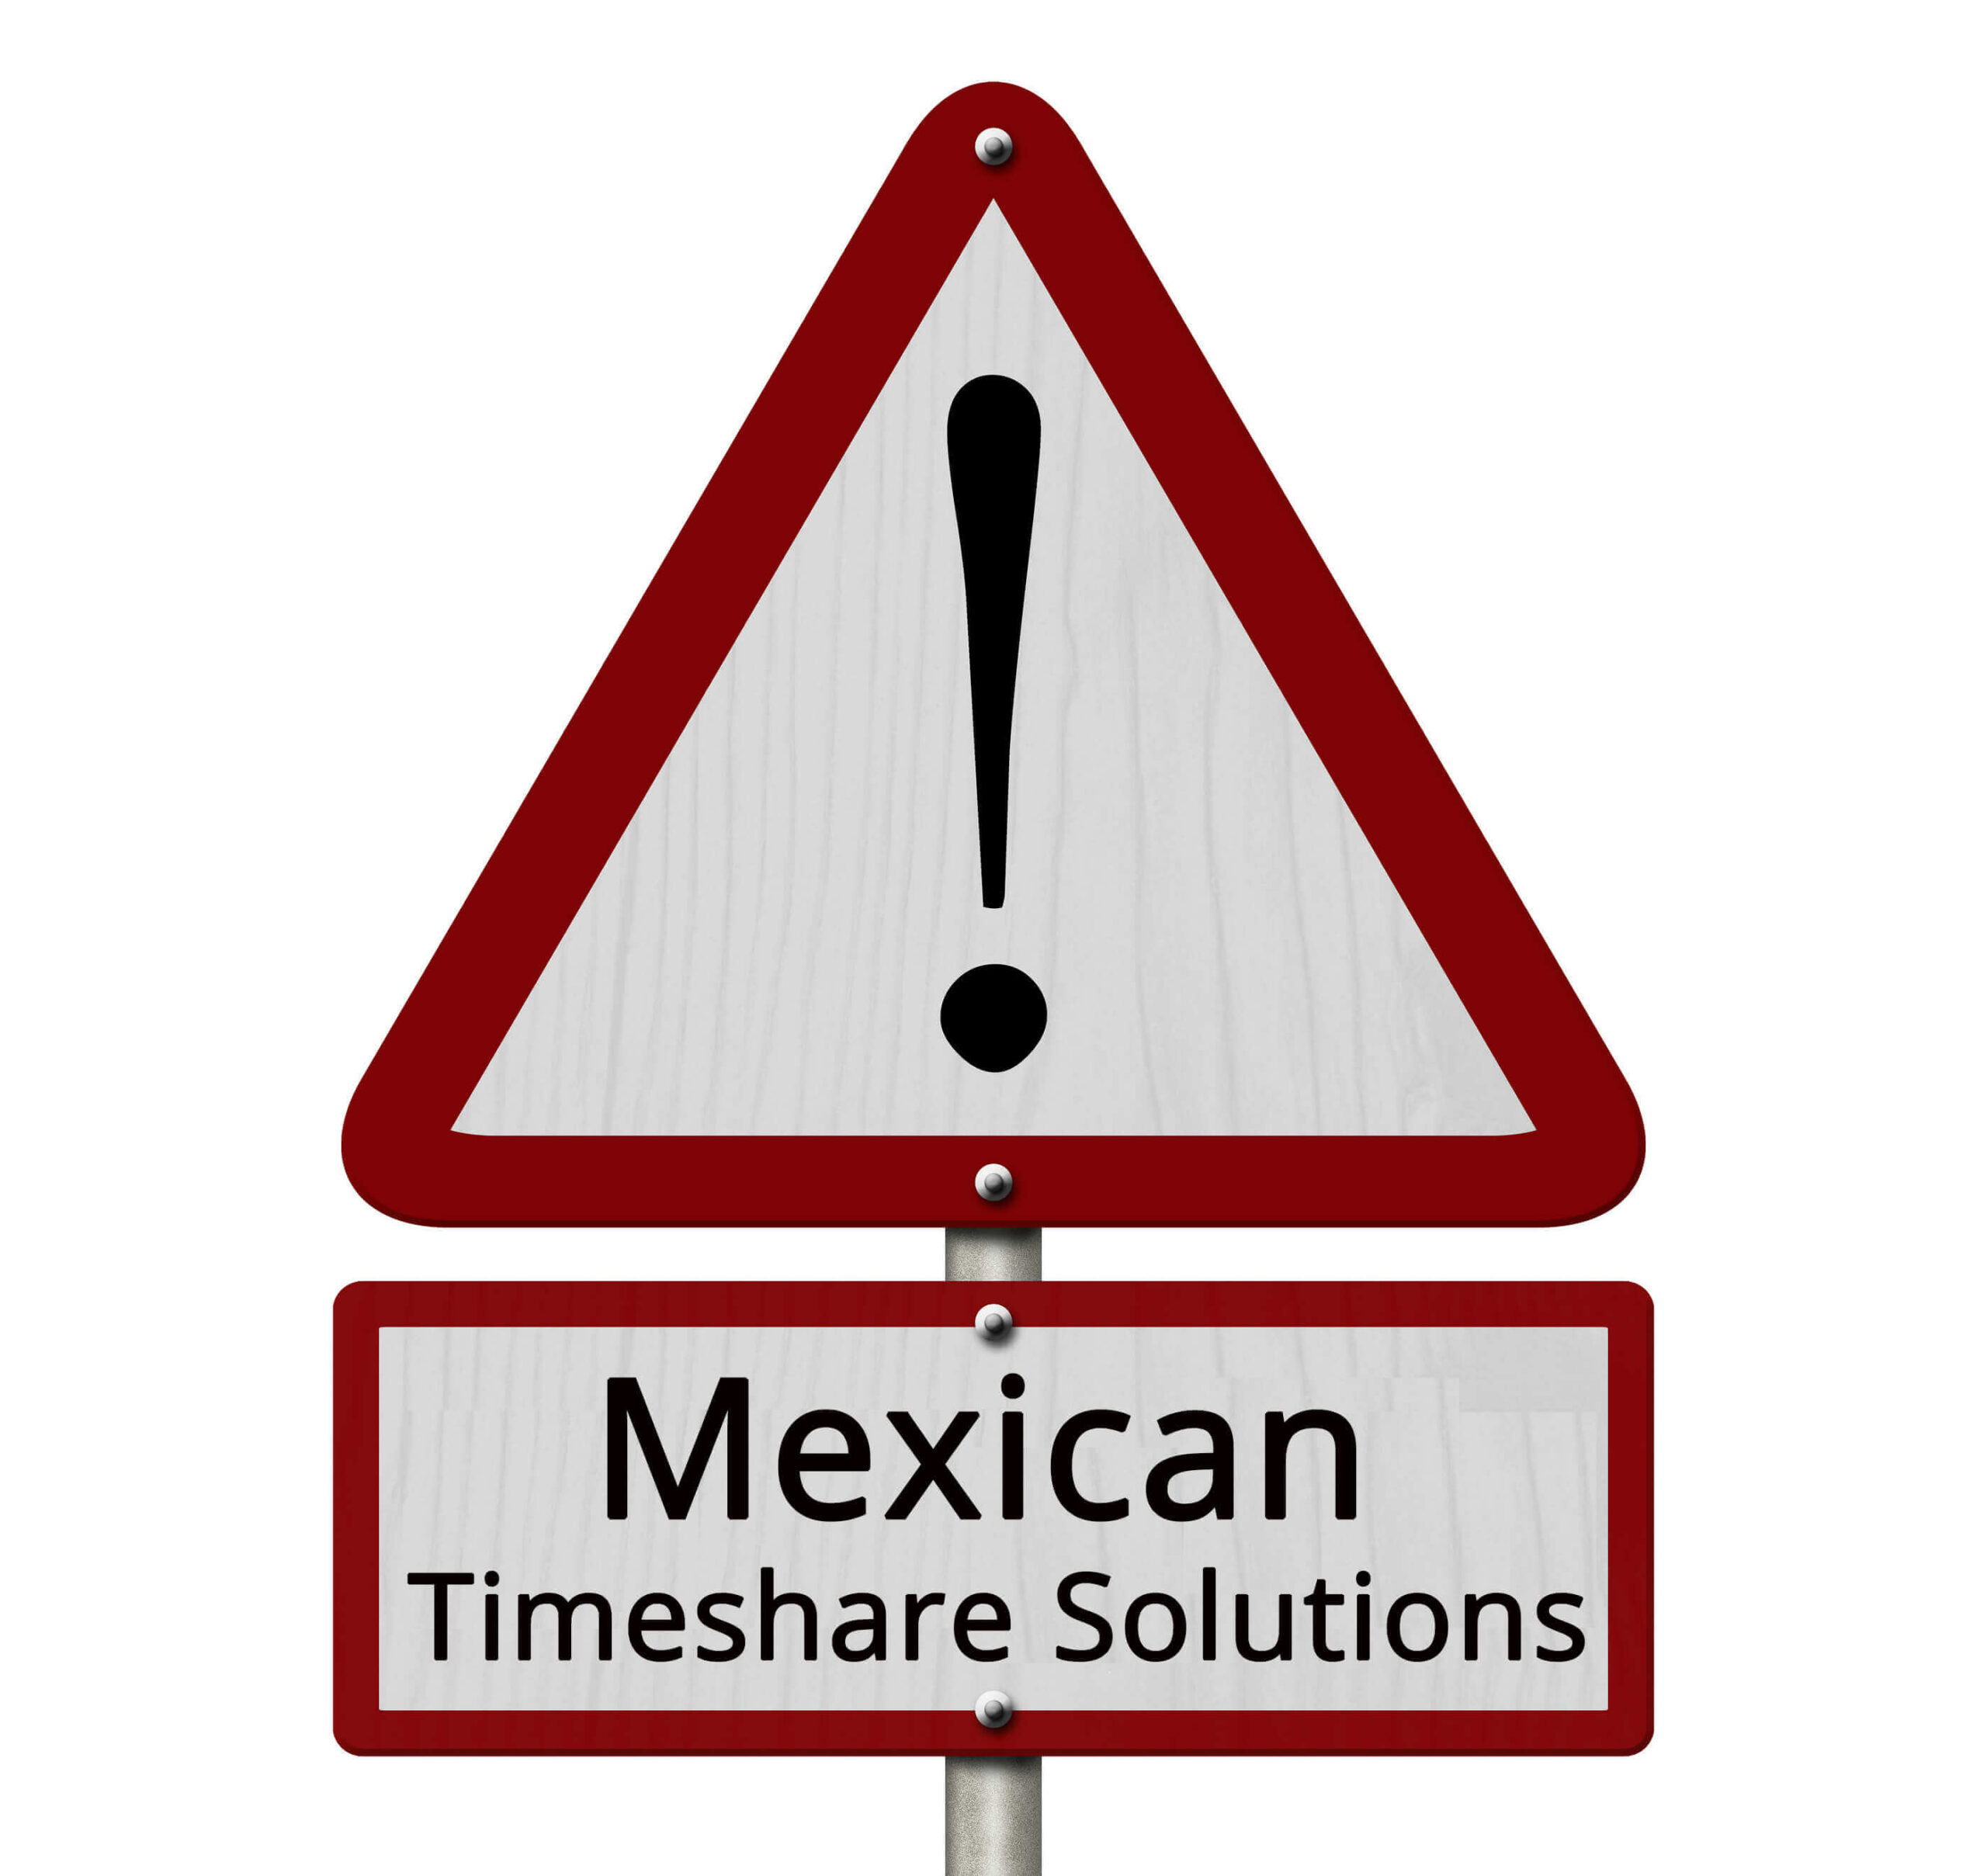 Mexican Timeshare Solutions